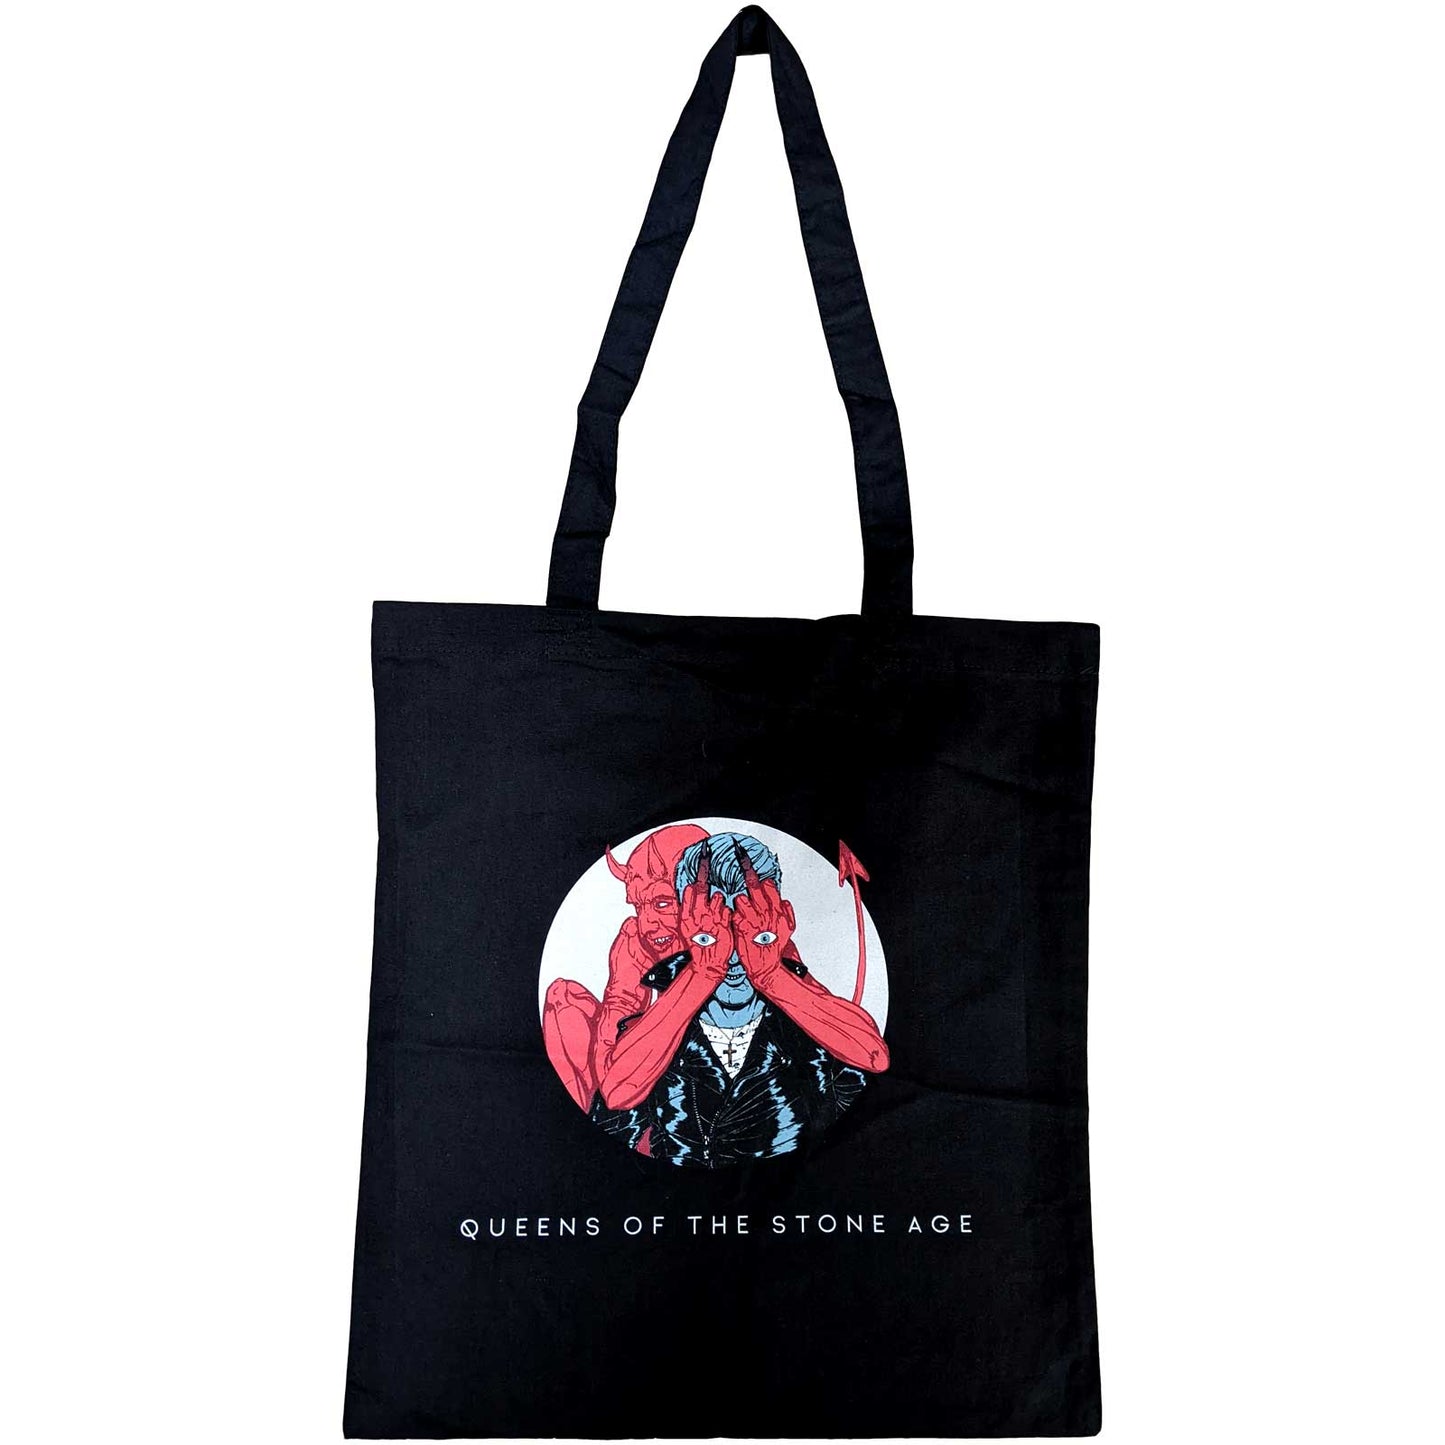 Queens Of The Stone Age Tote Bag: Villains